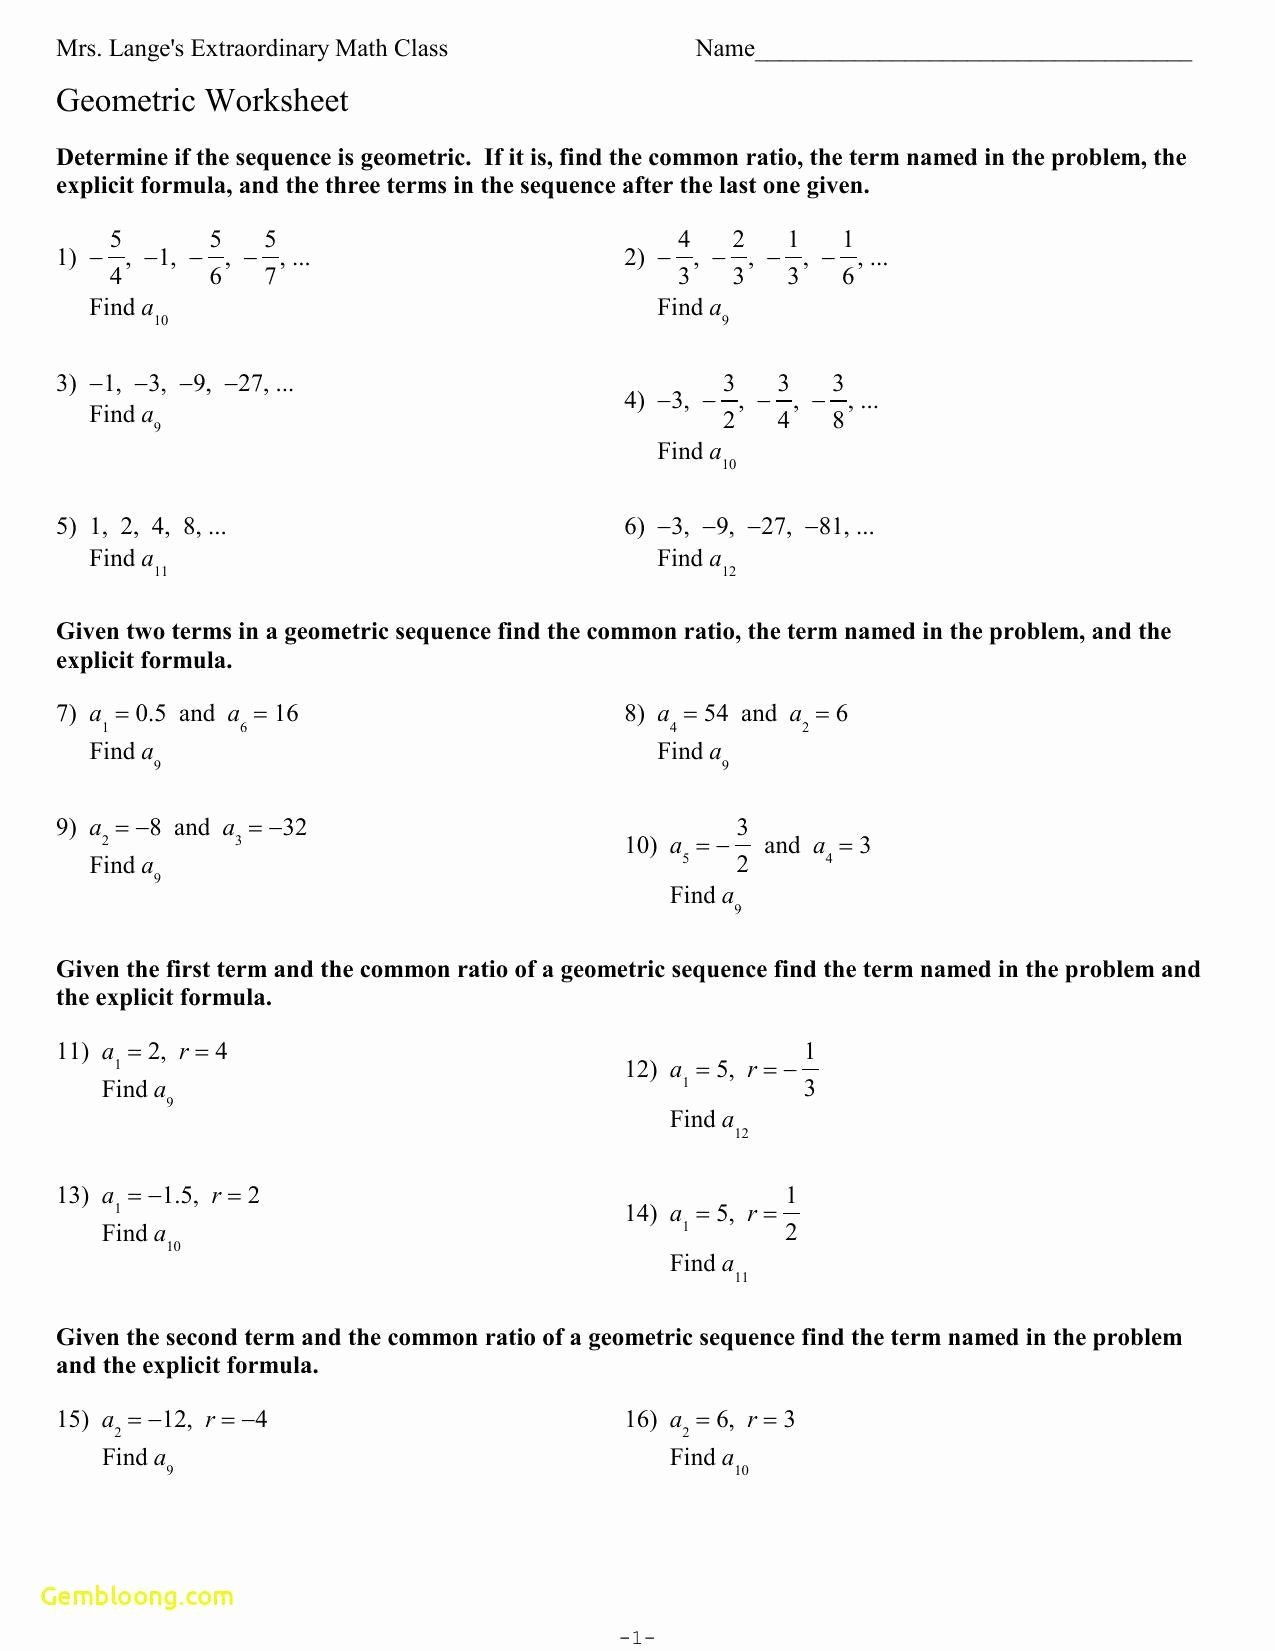 Geometric and Arithmetic Sequence Worksheet 50 Arithmetic Sequence Worksheet Answers In 2020 with